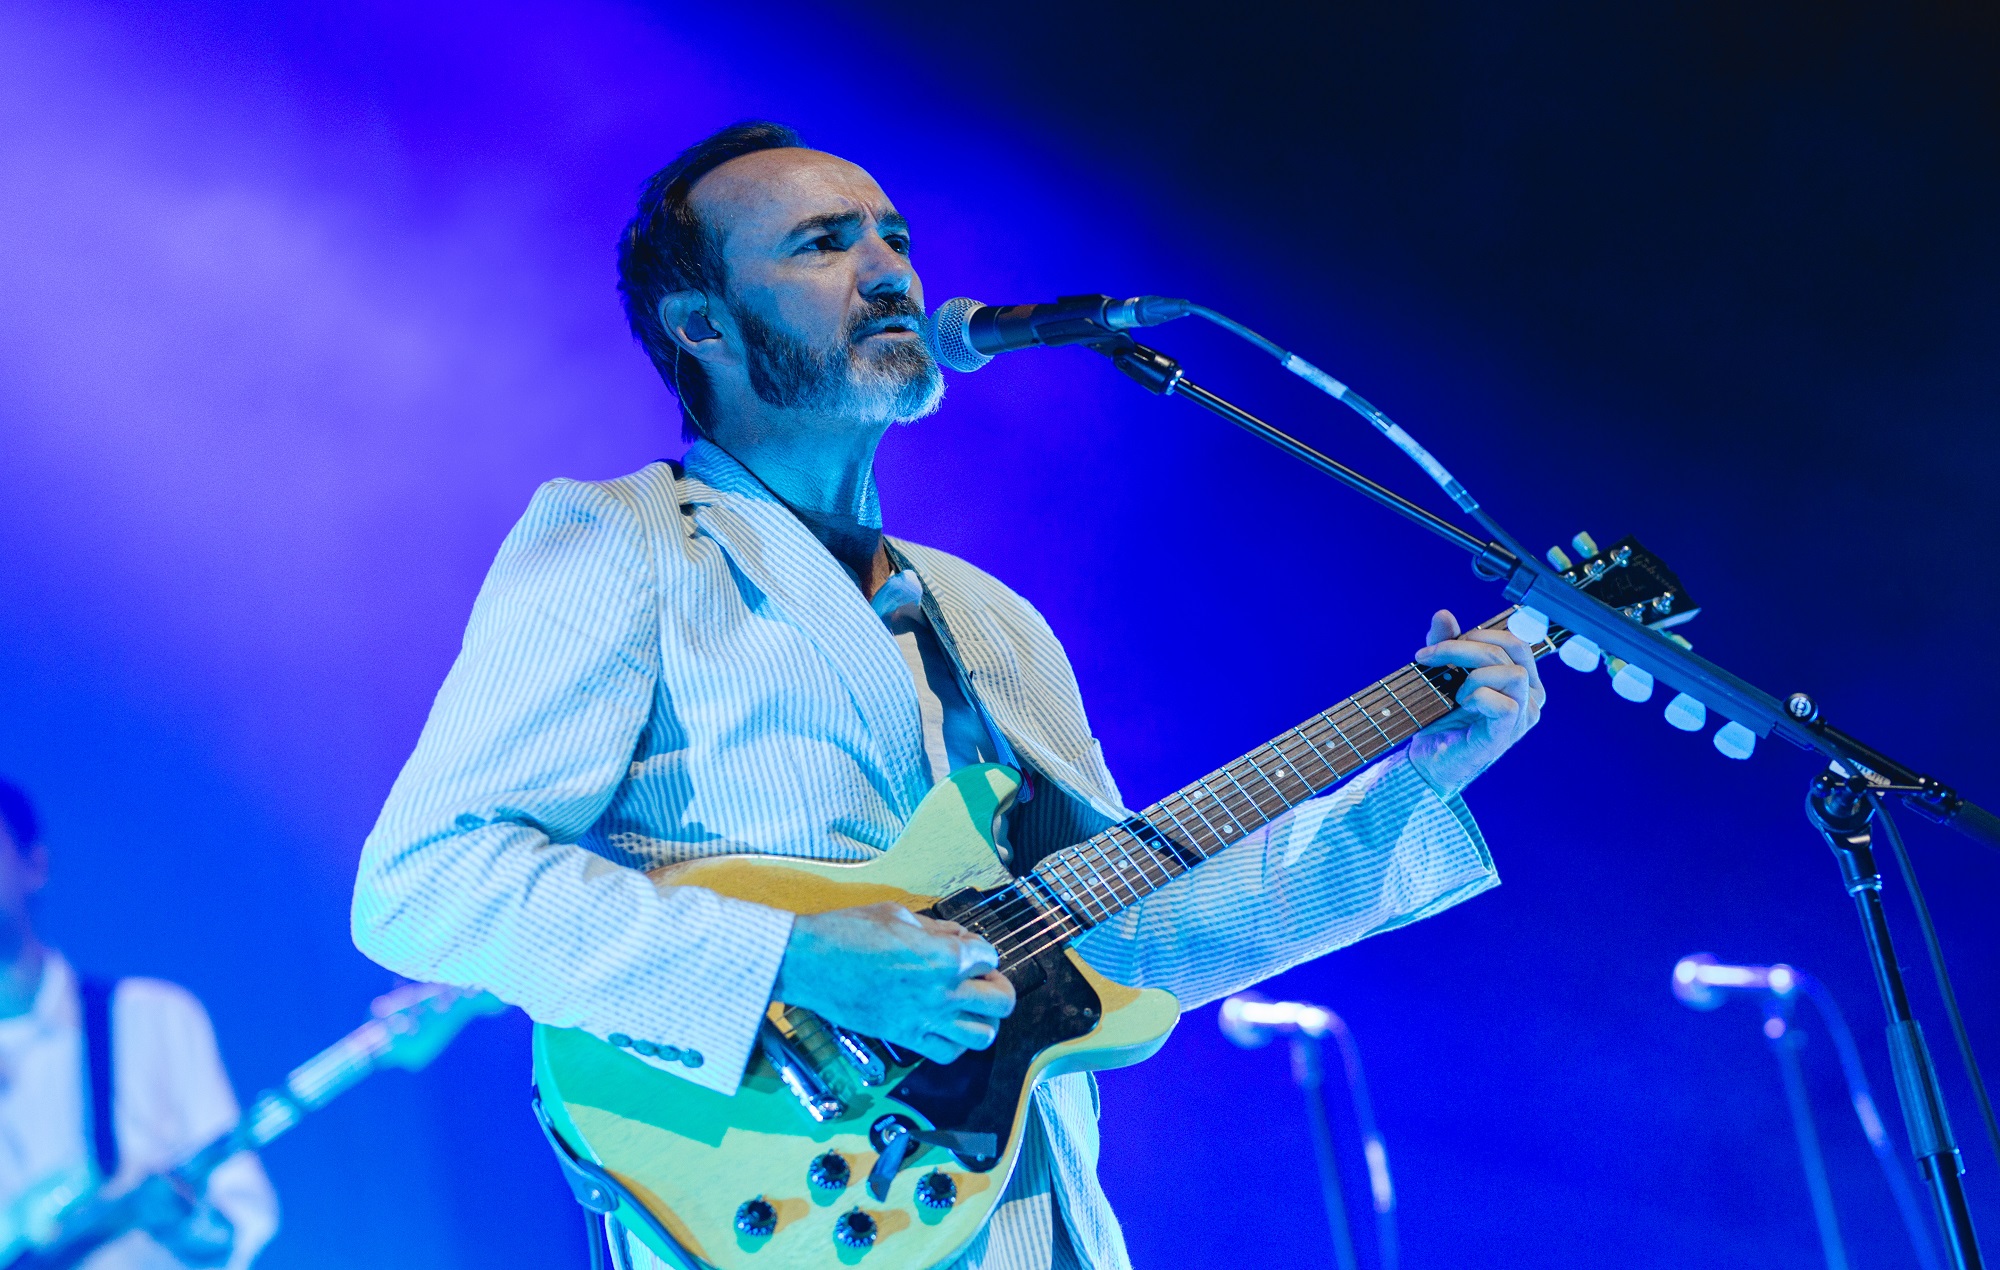 James Mercer says he is working on a new The Shins album